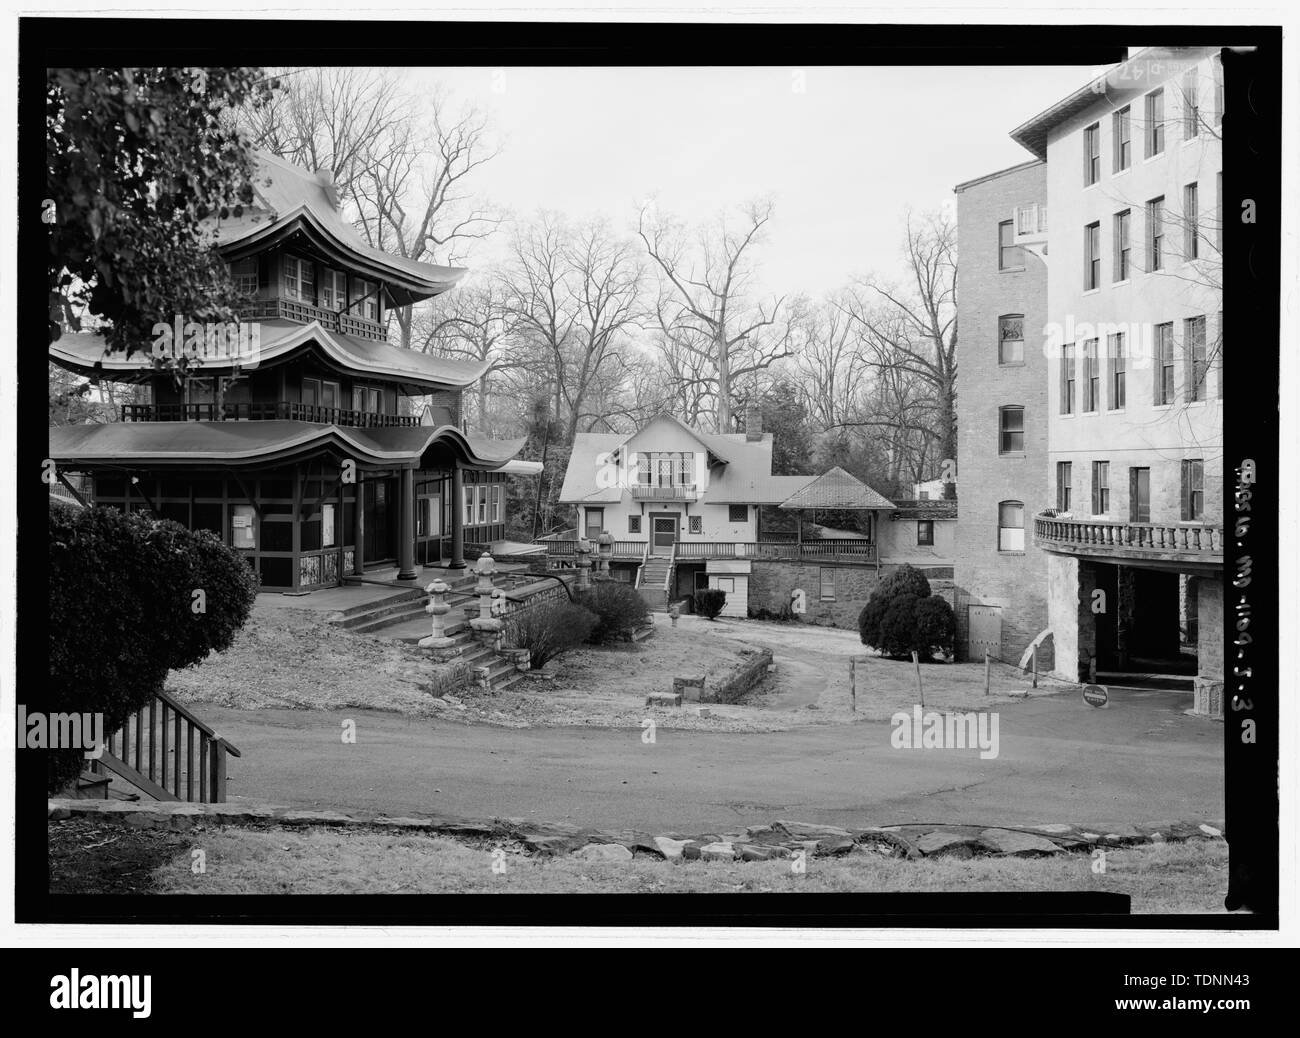 Perspective view looking from the east to Pagoda; note Swiss Chalet in background - National Park Seminary, Japanese Pagoda, 2805 Linden Lane, Silver Spring, Montgomery County, MD; Chi Psi Epsilon sorority; Price, Virginia B, transmitter; Ott, Cynthia, historian; Boucher, Jack E, photographer; Price, Virginia B, transmitter; Lavoie, Catherine C, project manager Stock Photo